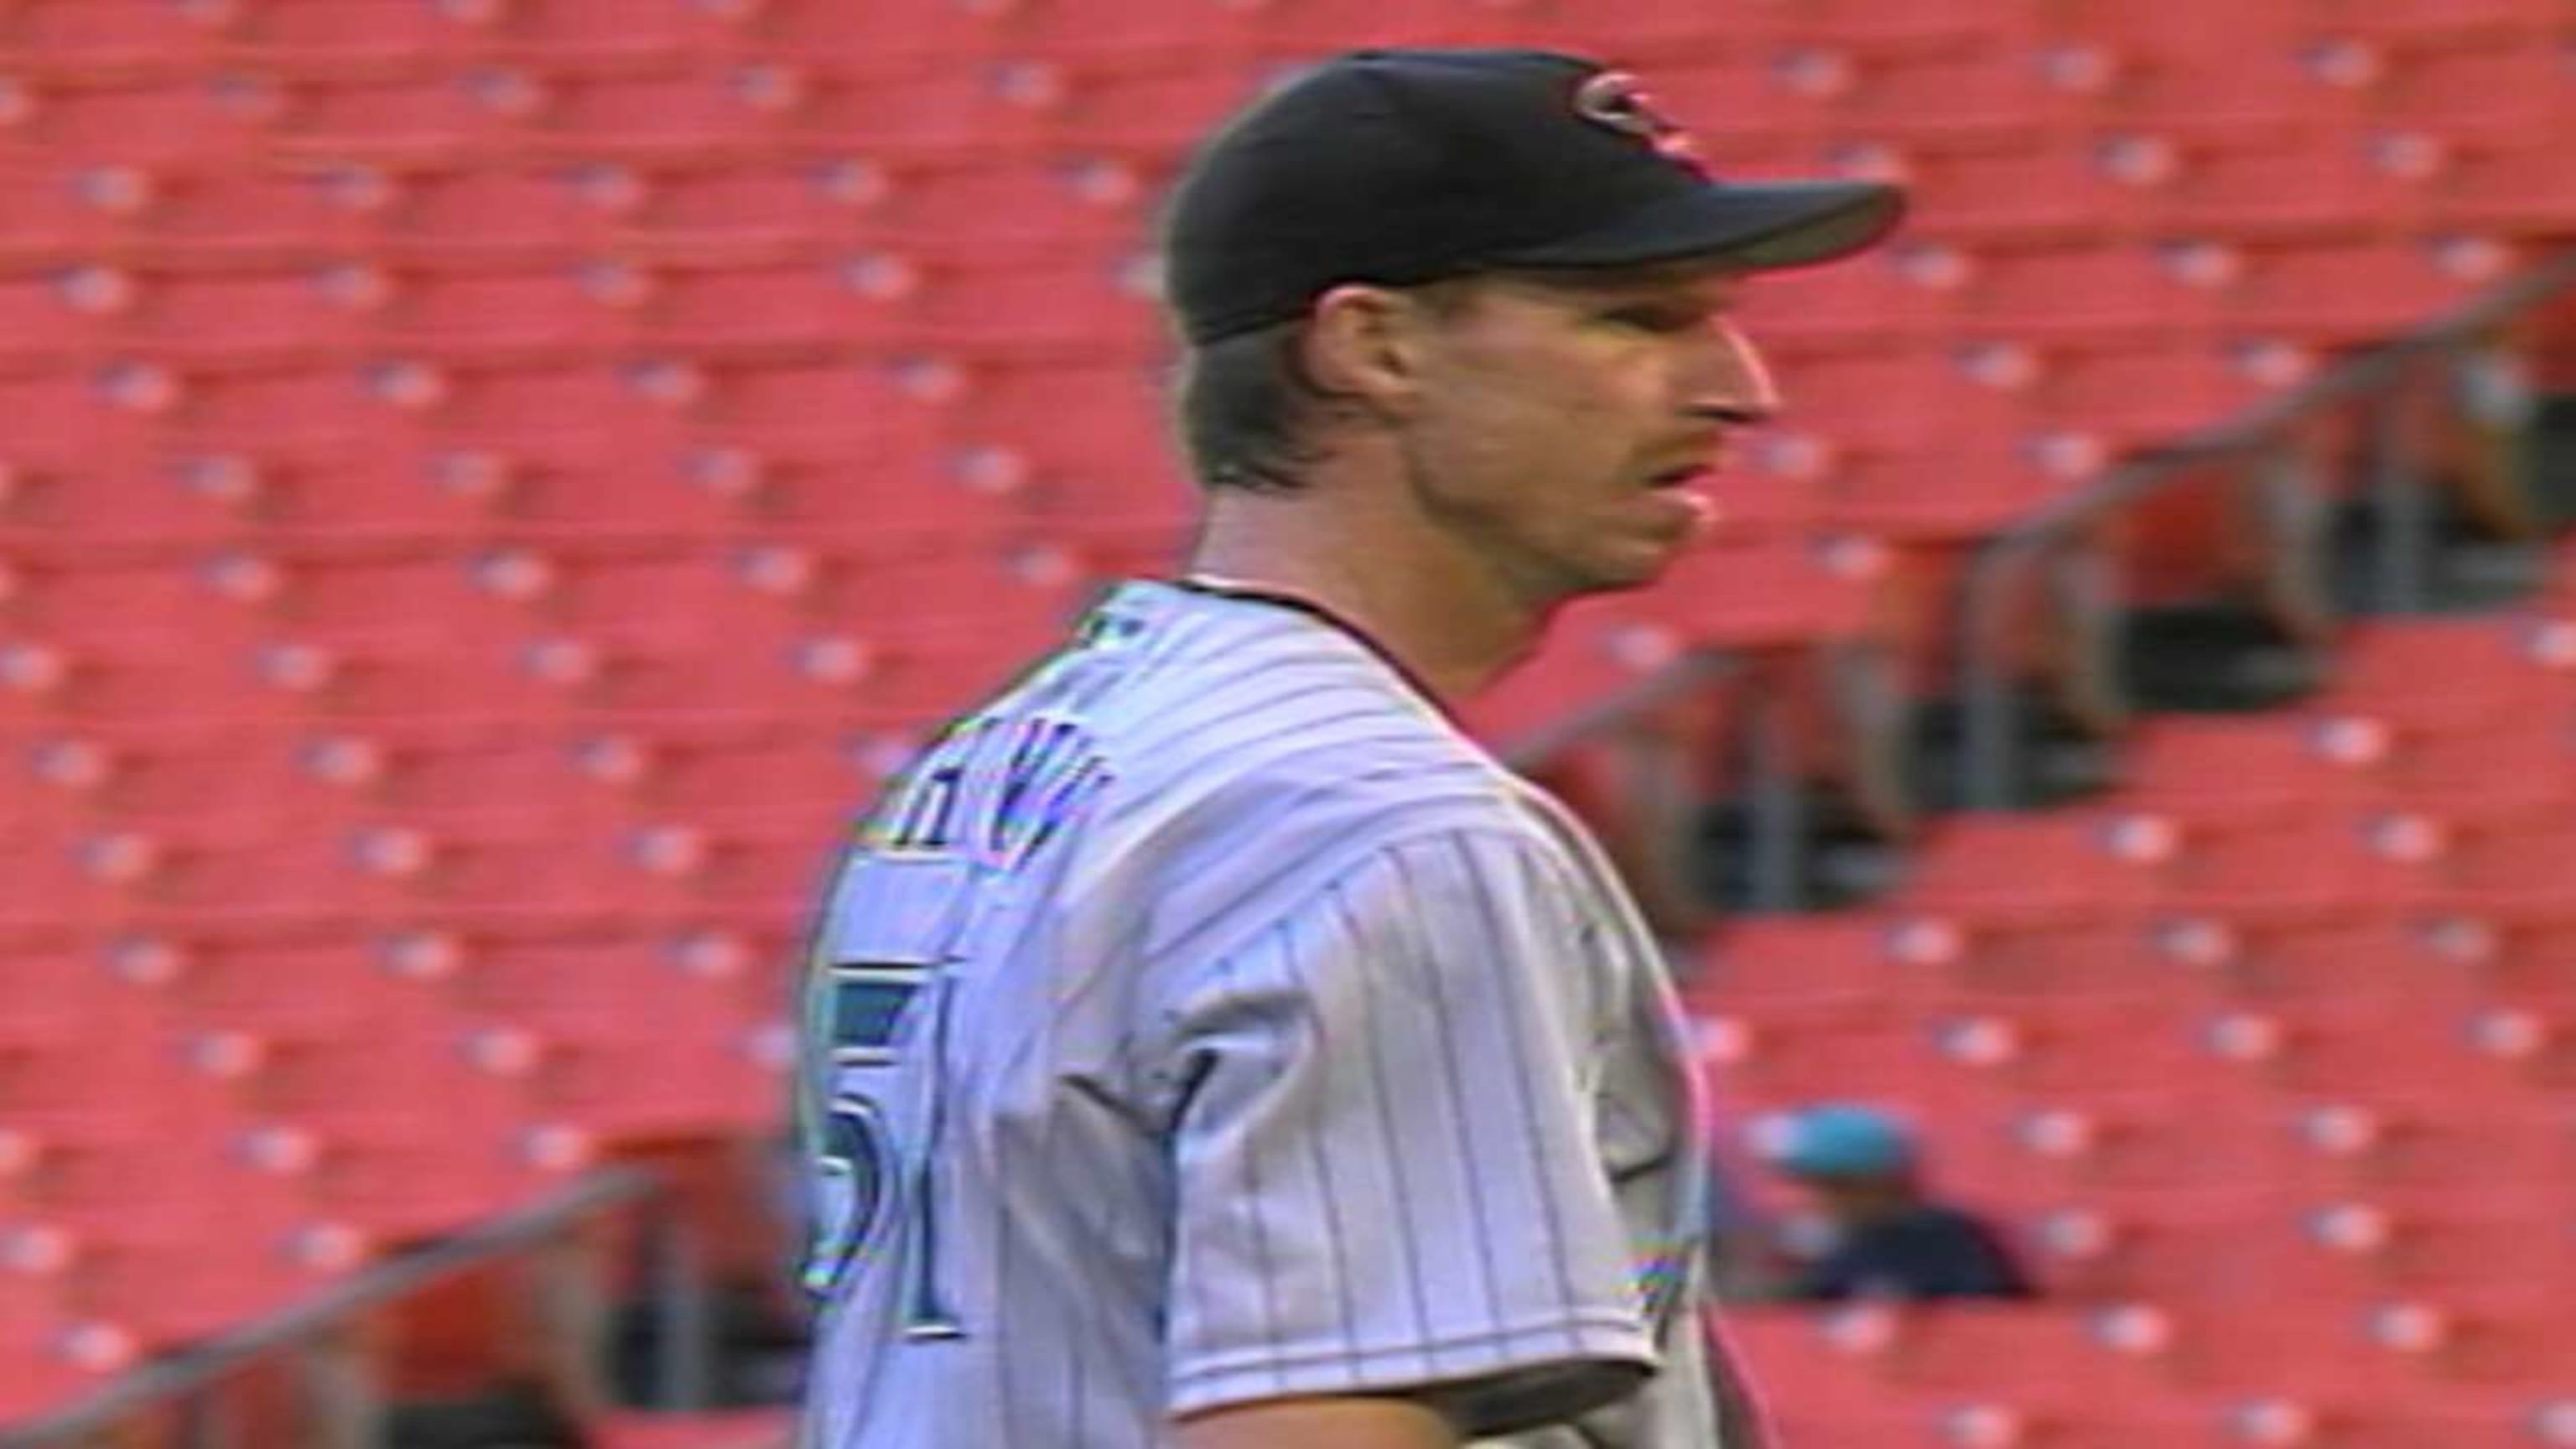 Randy Johnson becomes the 12th pitcher this century to strike out